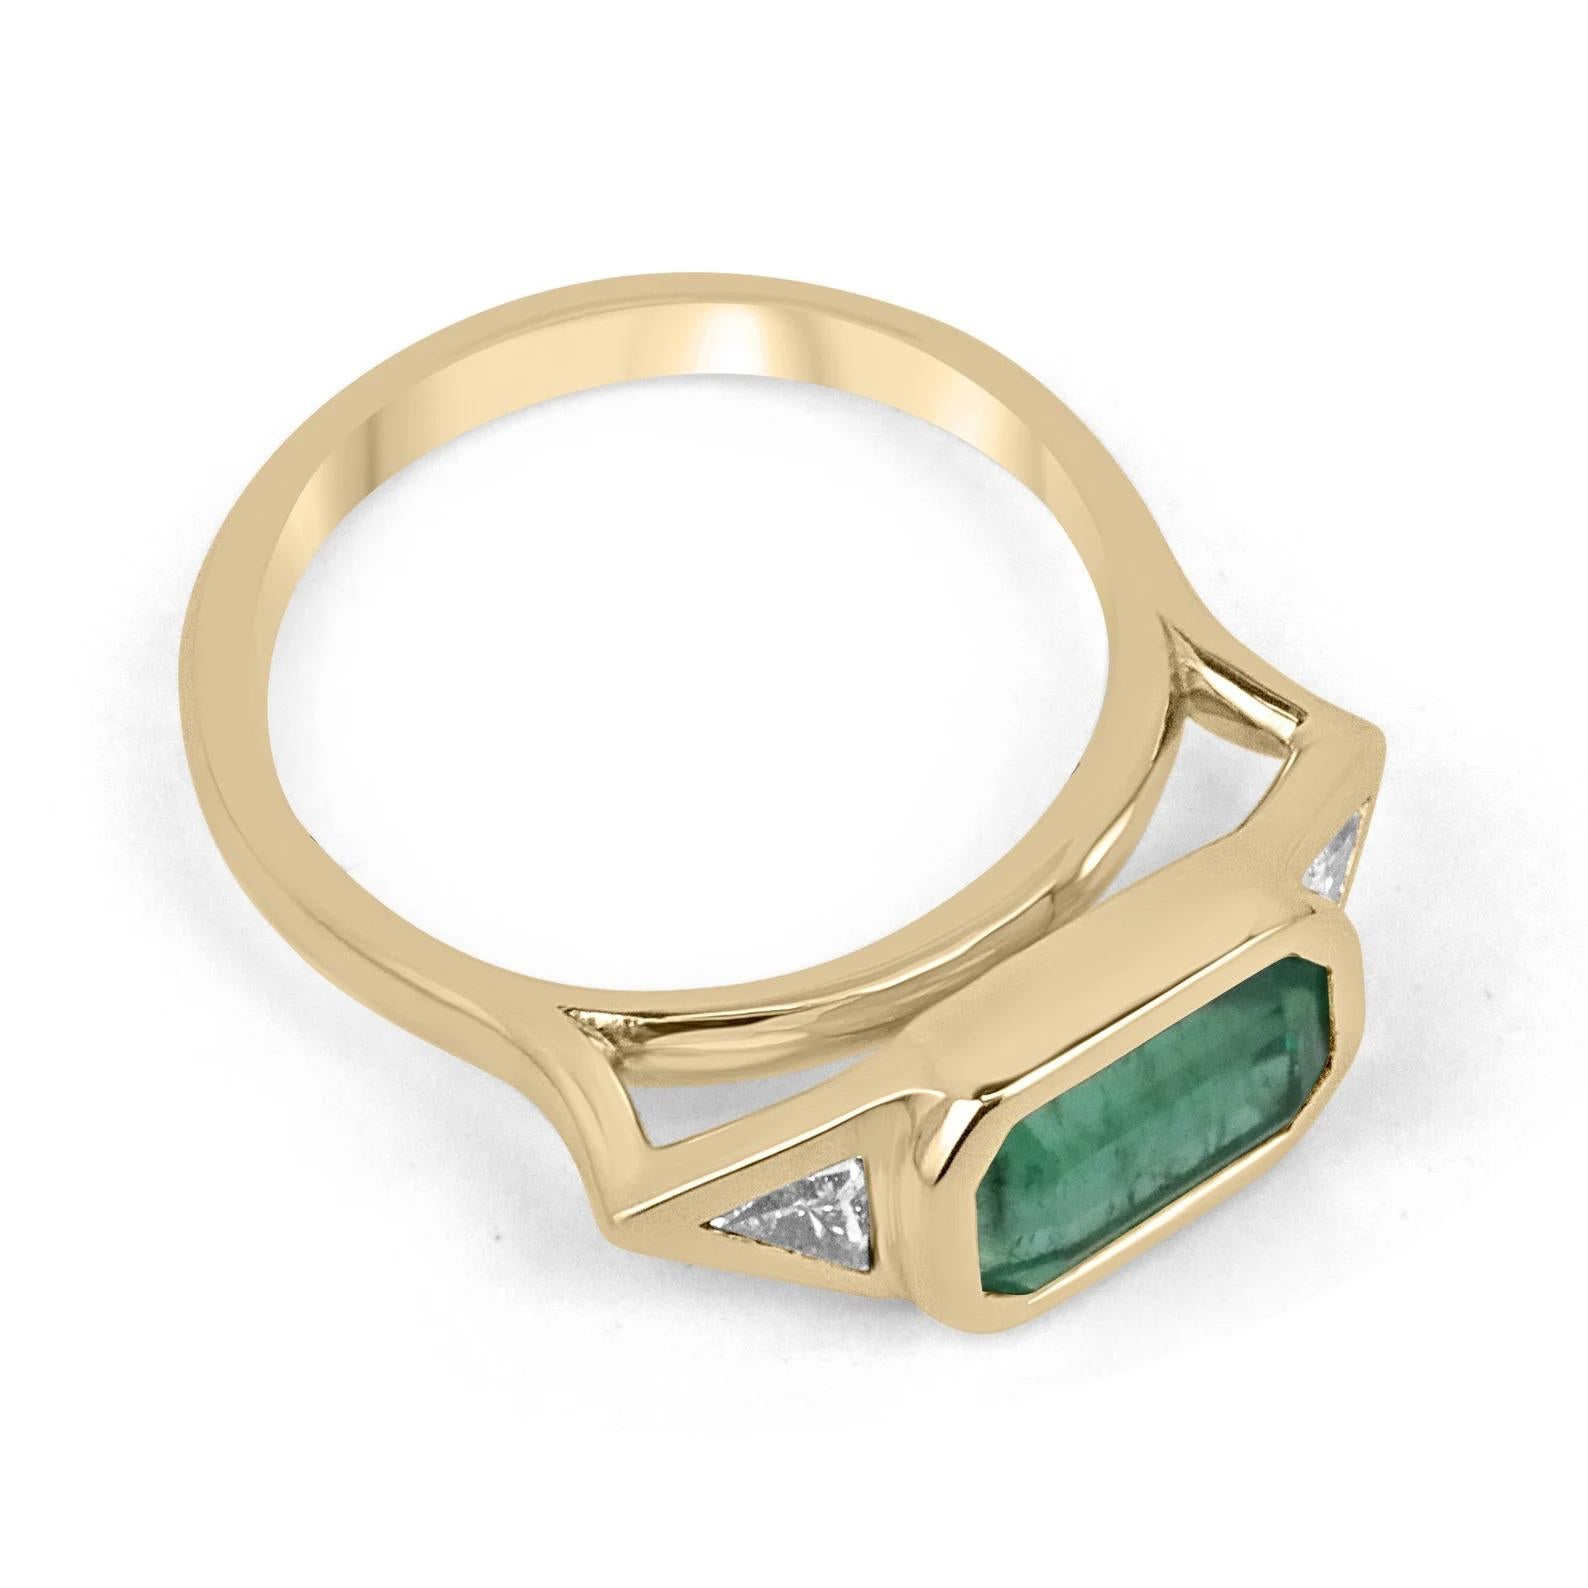 Featured here is a gorgeous emerald and diamond three-stone ring. The center stone is a stunning 2.32-carat, natural emerald-emerald cut. This gemstone displays medium green color and very good eye clarity. Accented on the sides are two trillion-cut